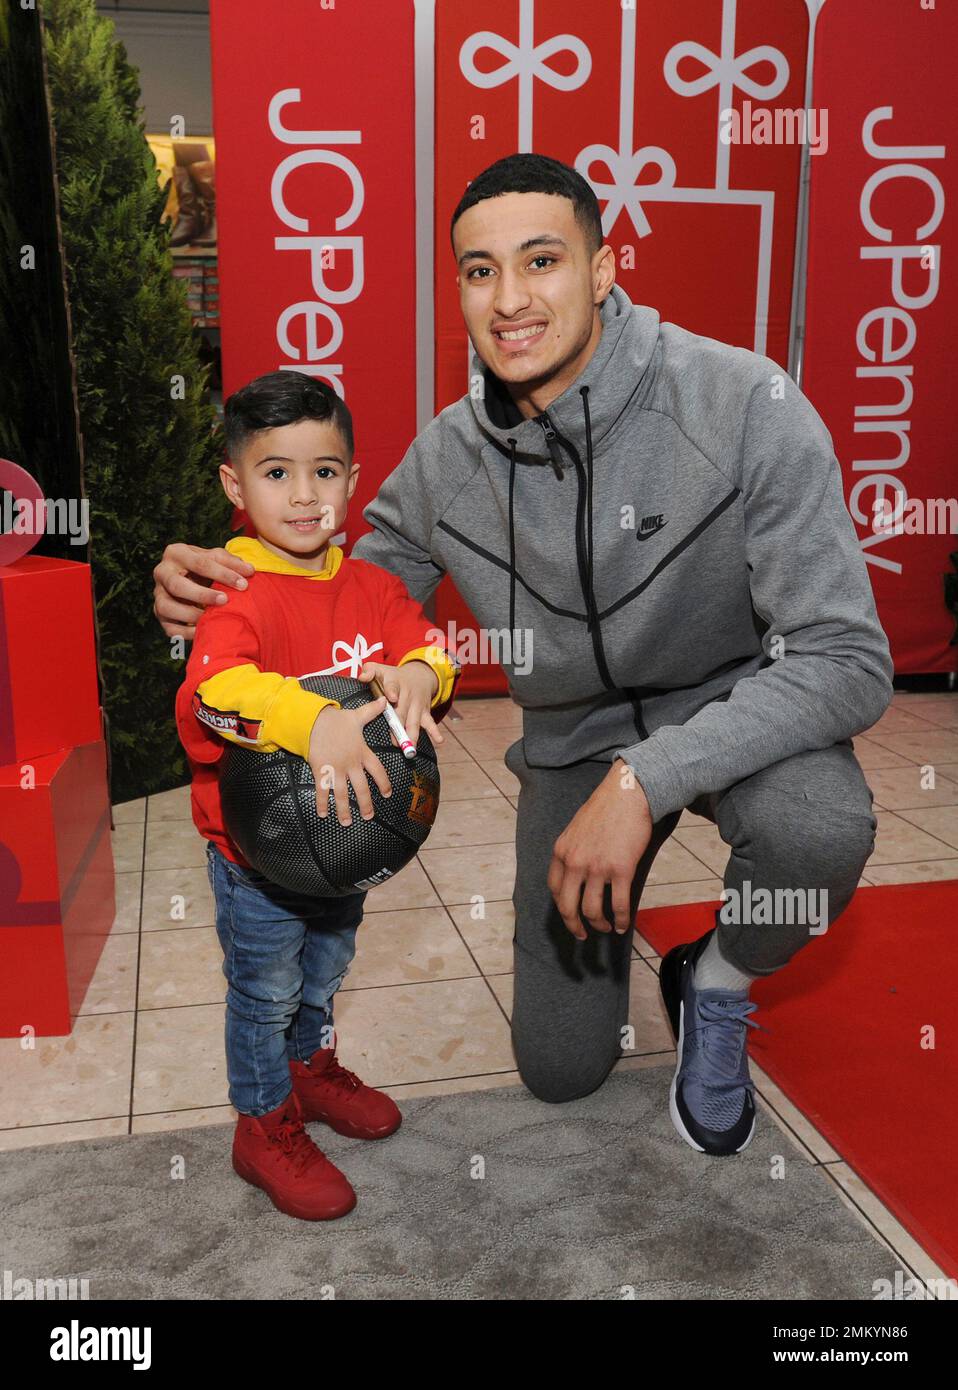 IMAGE DISTRIBUTED FOR JCPENNEY - Los Angeles Lakers Kyle Kuzma poses for a  photo with Luke Divelbiss, 3, of the Weingart East Los Angeles YMCA, at the  Glendale Galleria JCPenney store on Tuesday, Dec. 11, 2018, in Glendale,  Calif. Kuzma